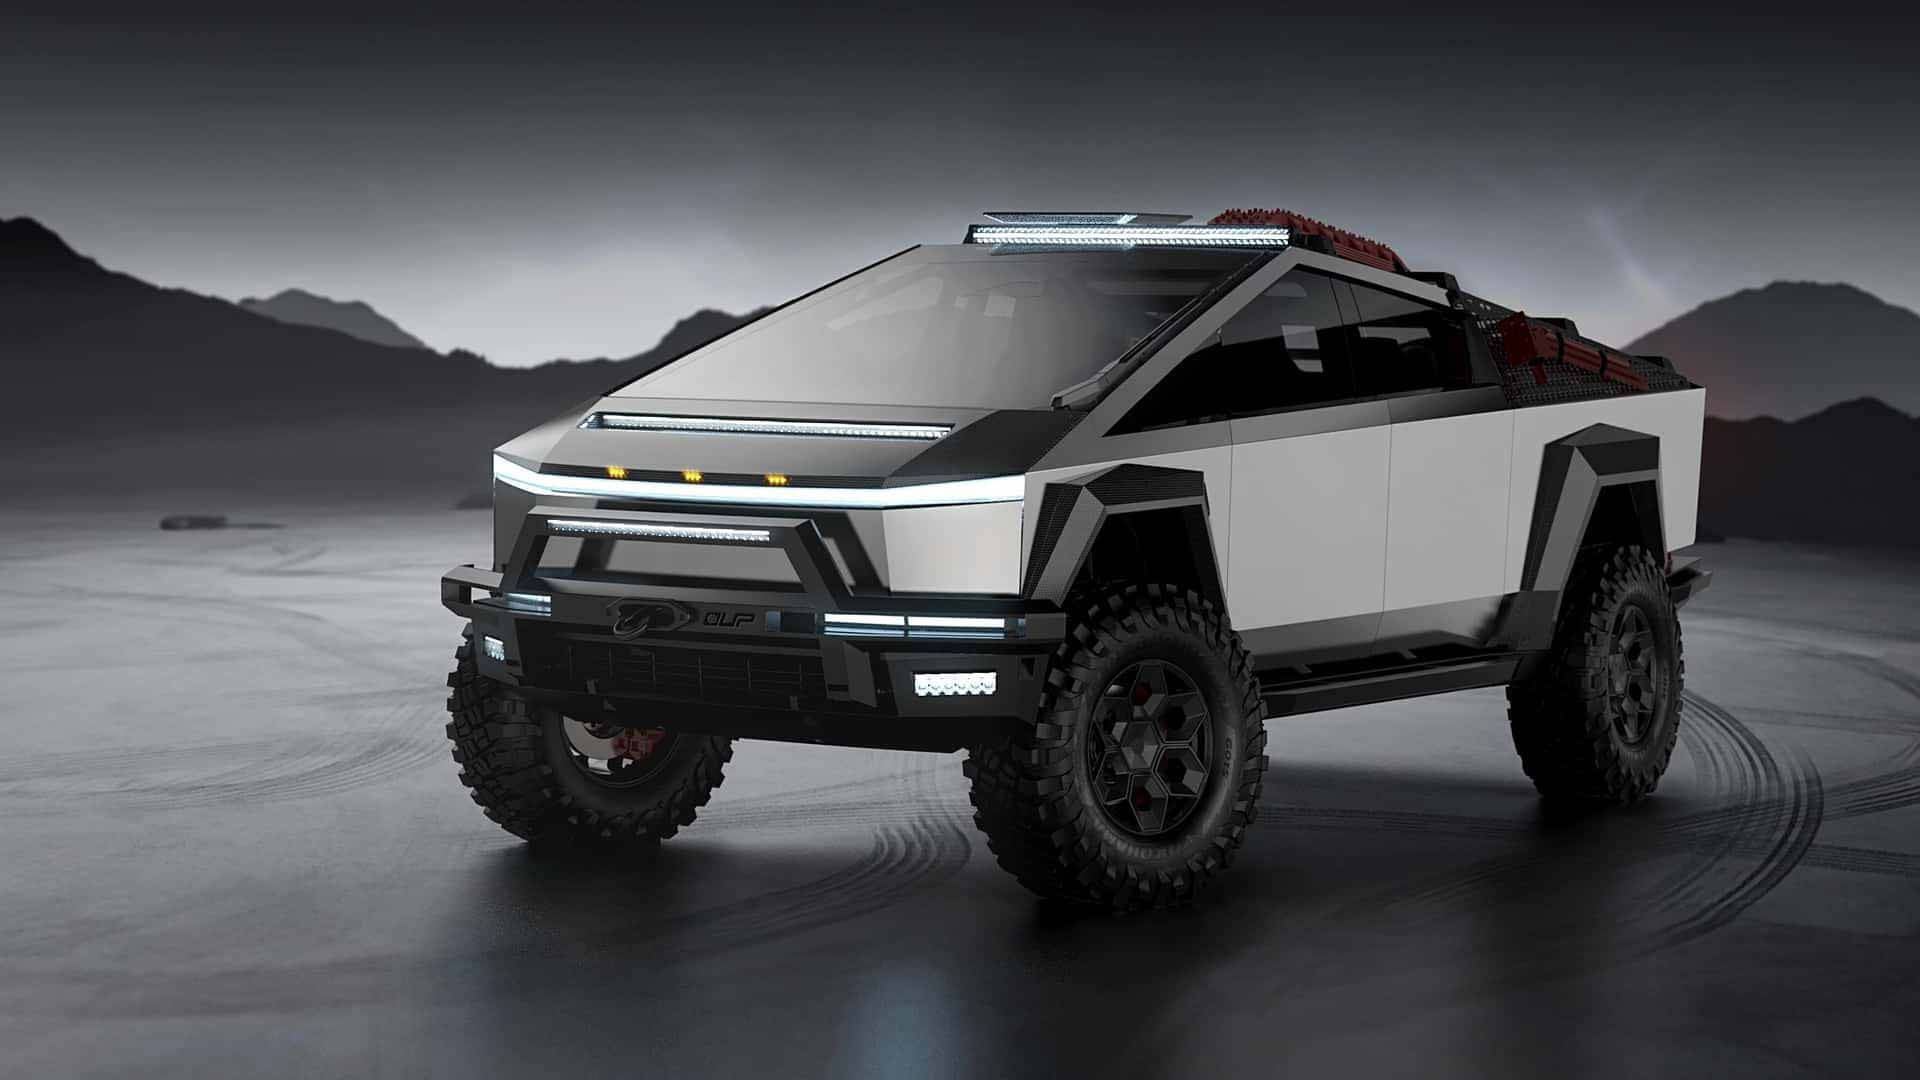 Tesla Cybertruck electric pickup turned into an expeditionary all-terrain vehicle